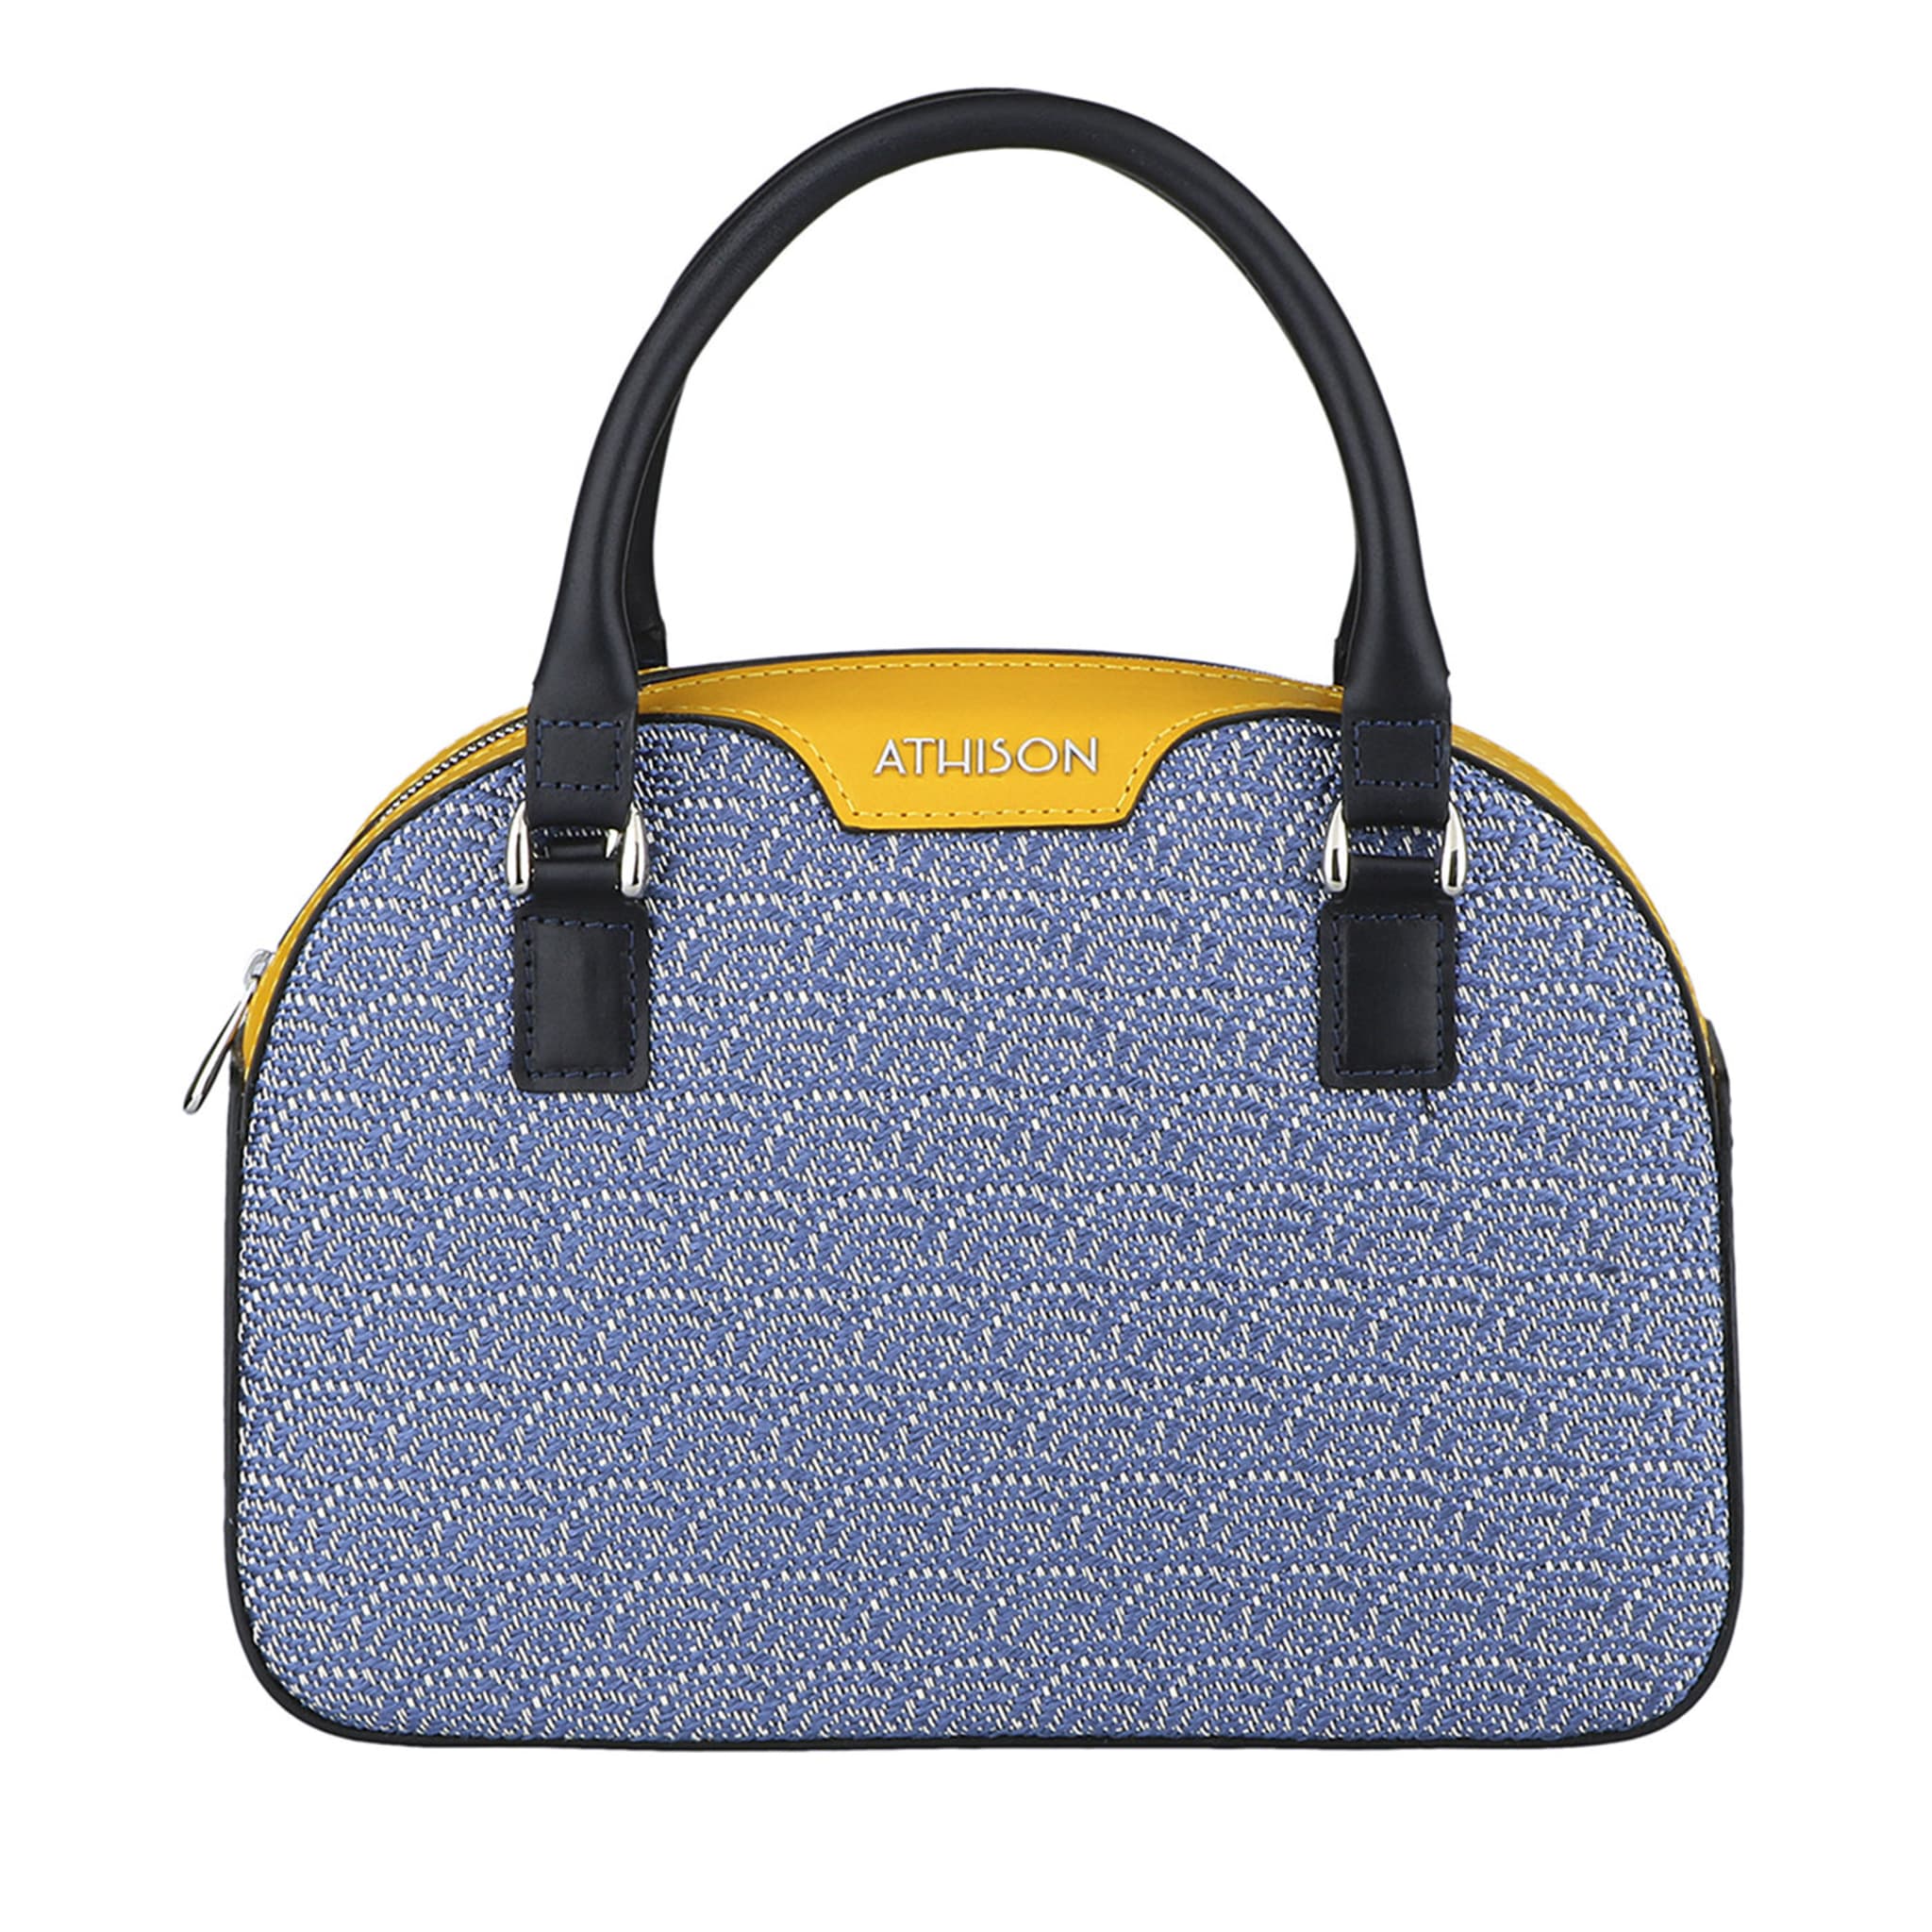 Leather Crossbody Bag “Stresa” - Yellow and Light Blue - Main view